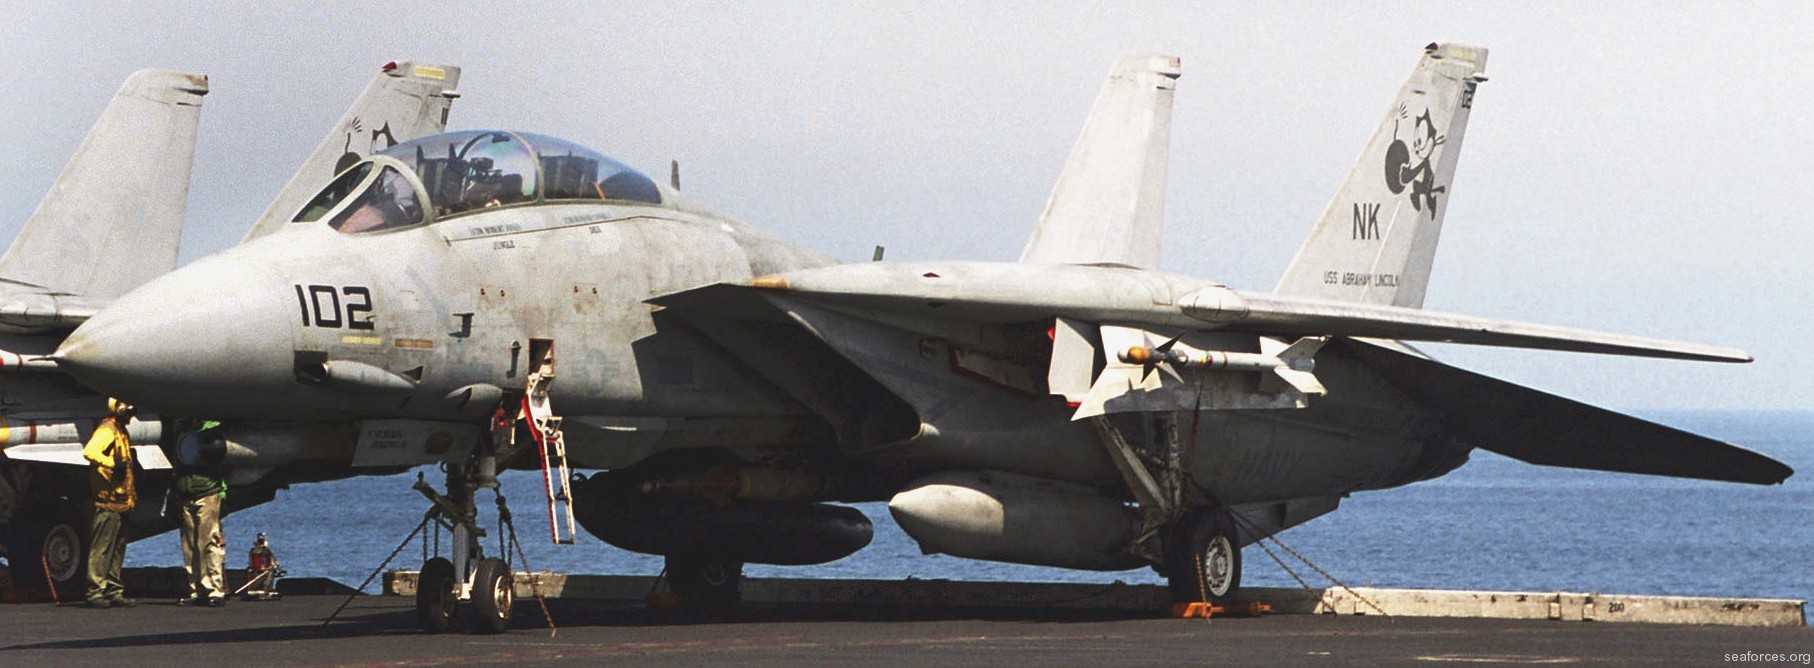 vf-31 tomcatters fighter squadron navy f-14d tomcat cvw-14 uss abraham lincoln cvn-72 206